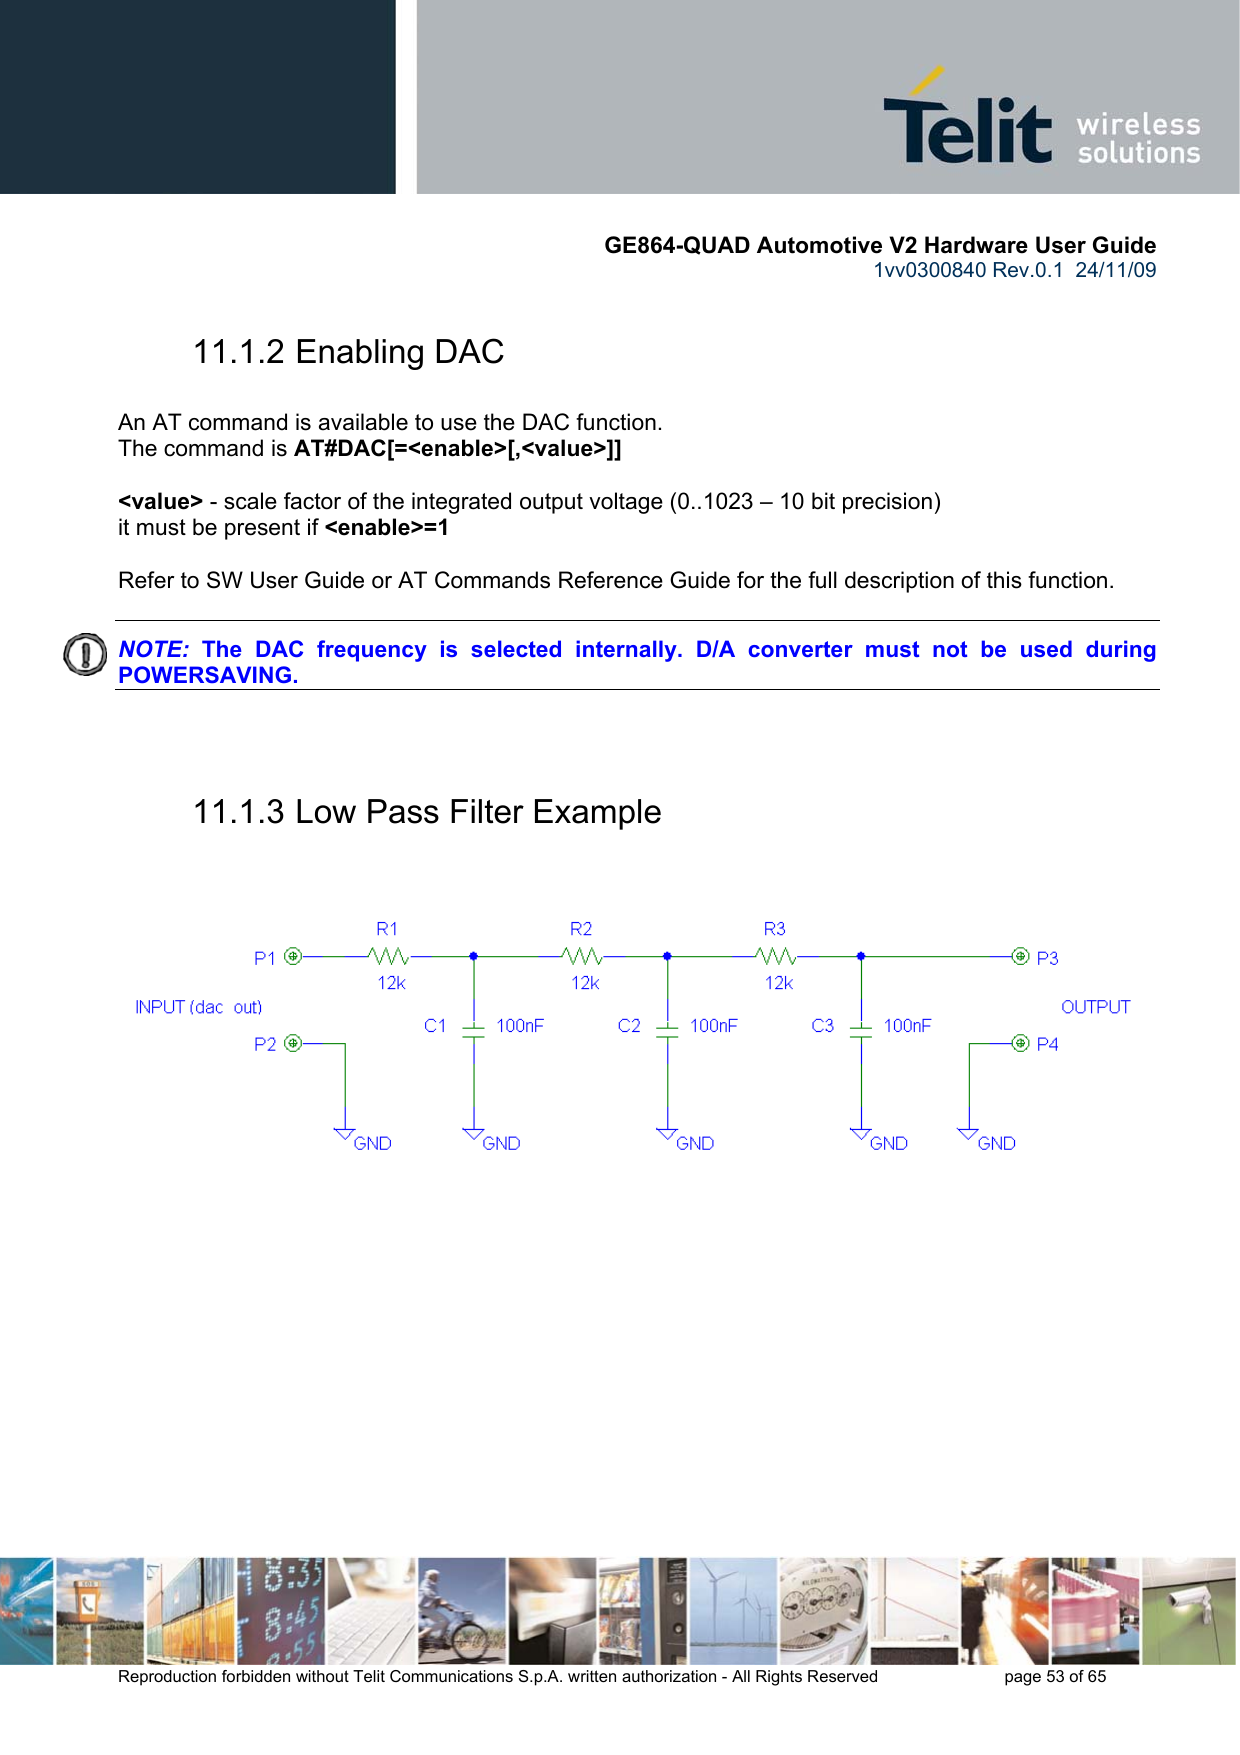       GE864-QUAD Automotive V2 Hardware User Guide 1vv0300840 Rev.0.1  24/11/09      Reproduction forbidden without Telit Communications S.p.A. written authorization - All Rights Reserved    page 53 of 65  11.1.2 Enabling DAC  An AT command is available to use the DAC function. The command is AT#DAC[=&lt;enable&gt;[,&lt;value&gt;]]  &lt;value&gt; - scale factor of the integrated output voltage (0..1023 – 10 bit precision) it must be present if &lt;enable&gt;=1  Refer to SW User Guide or AT Commands Reference Guide for the full description of this function.  NOTE:  The DAC frequency is selected internally. D/A converter must not be used during POWERSAVING.   11.1.3 Low Pass Filter Example     